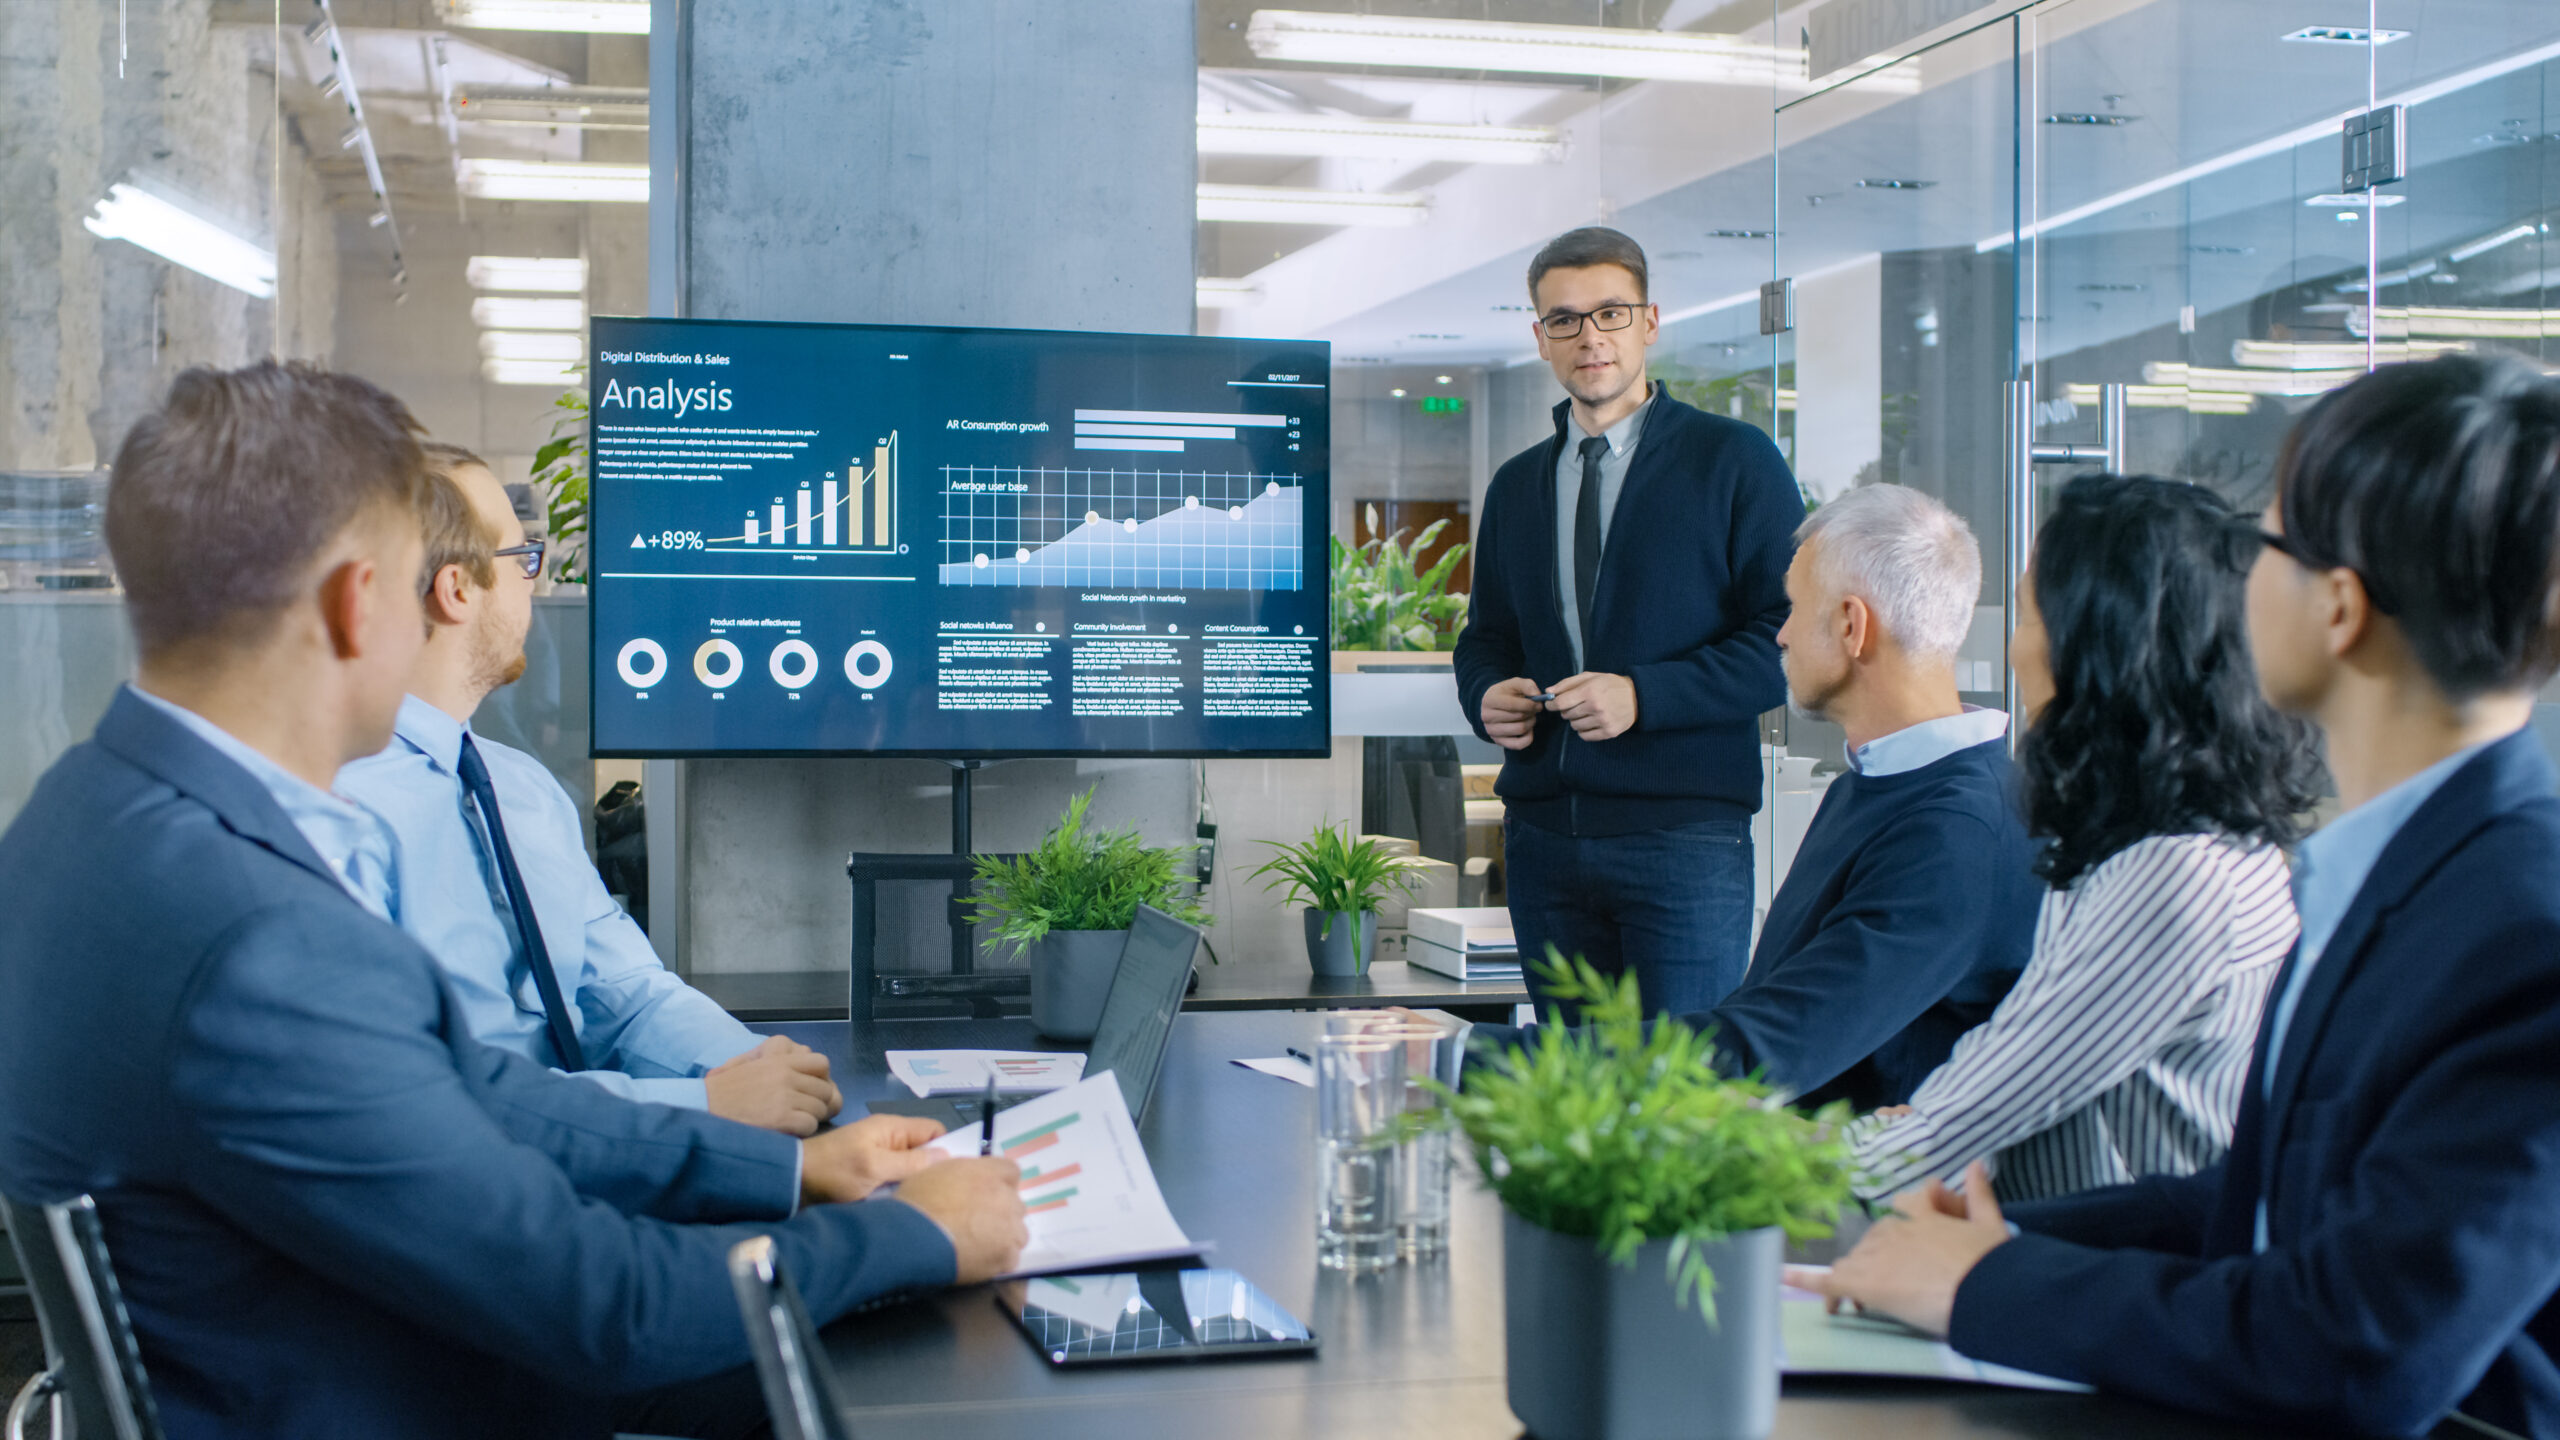 A diverse group of professionals gathered around a conference table in a sleek, modern boardroom. Charts and graphs are displayed on a large screen at the front of the room, while individuals engage in lively discussion, gesturing towards the data projections.